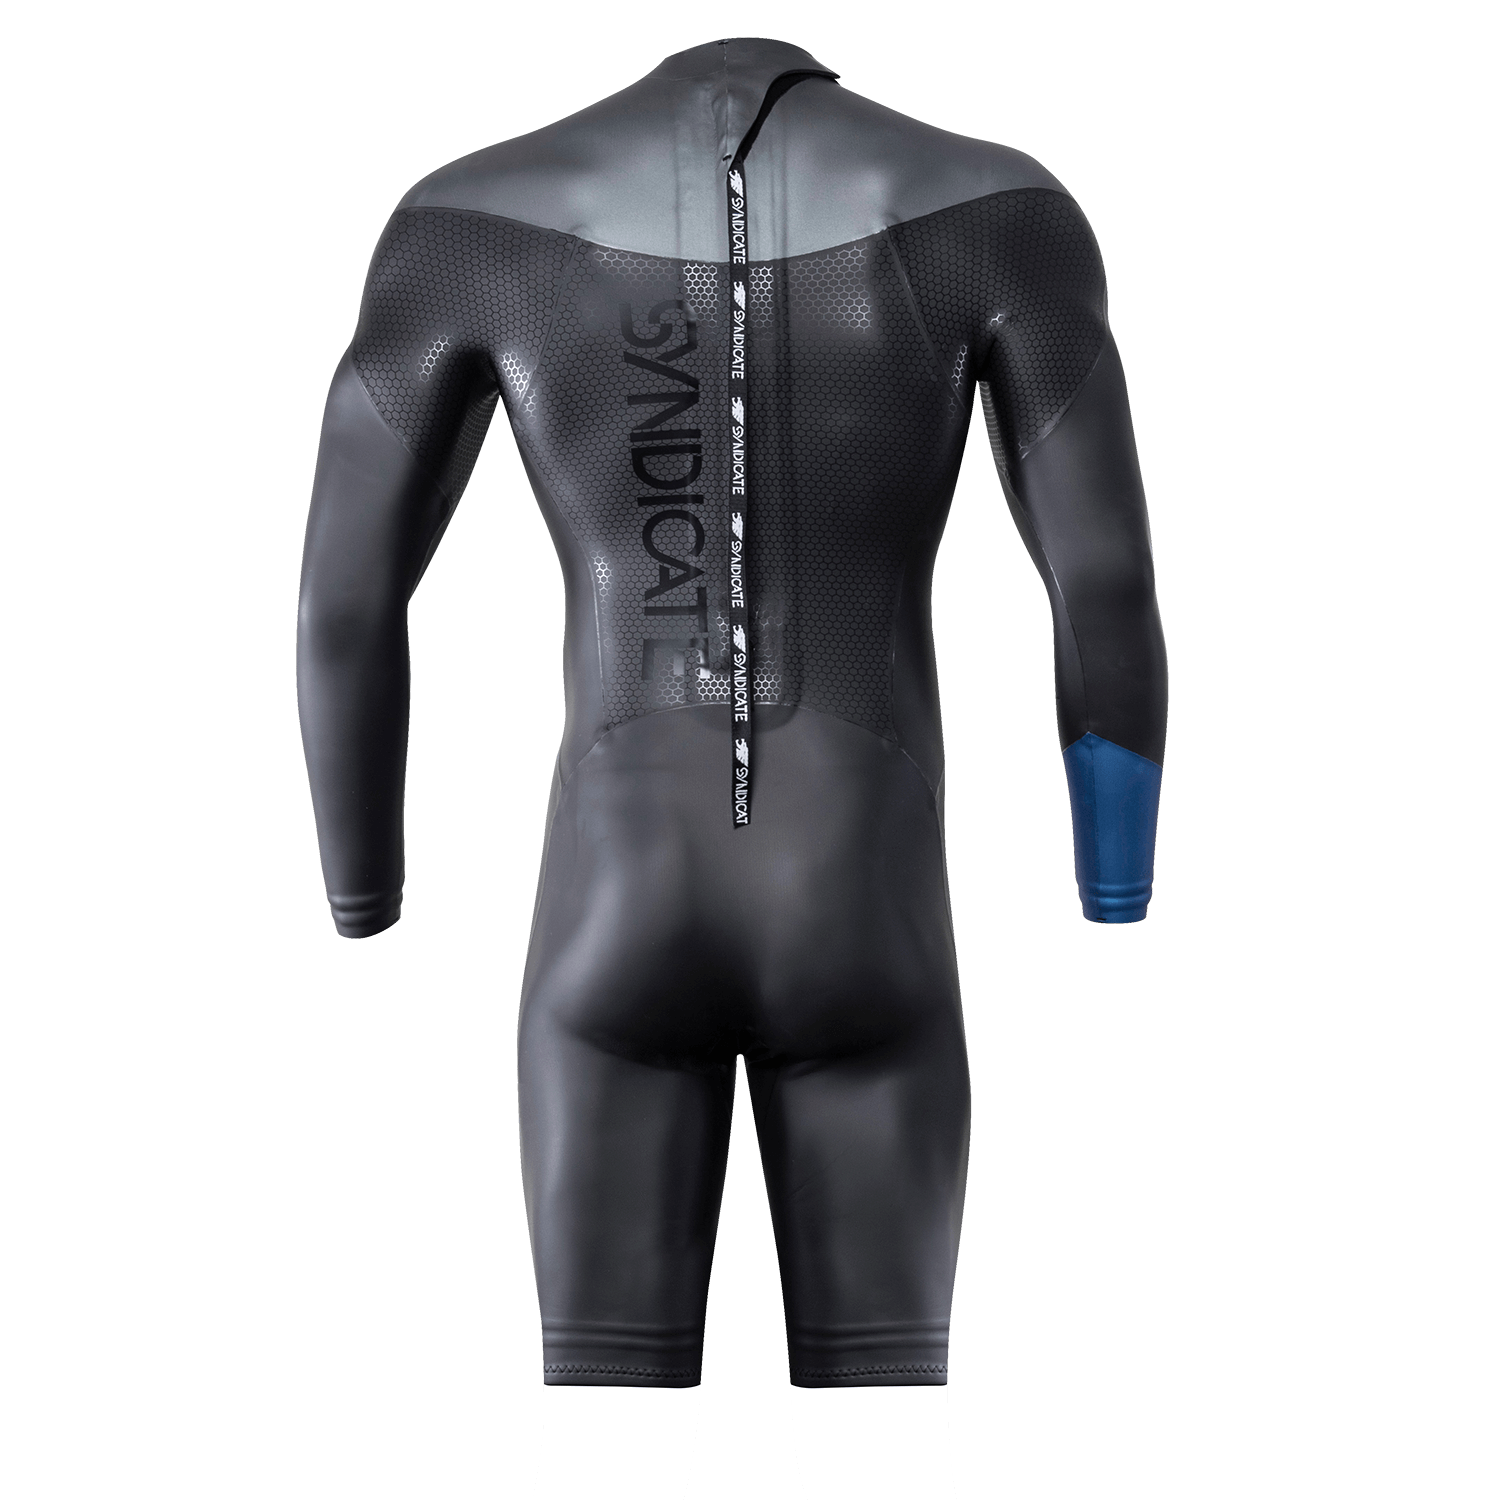 Serious tech in the Syndicate Dryflex Wetsuits - hydrophobic and